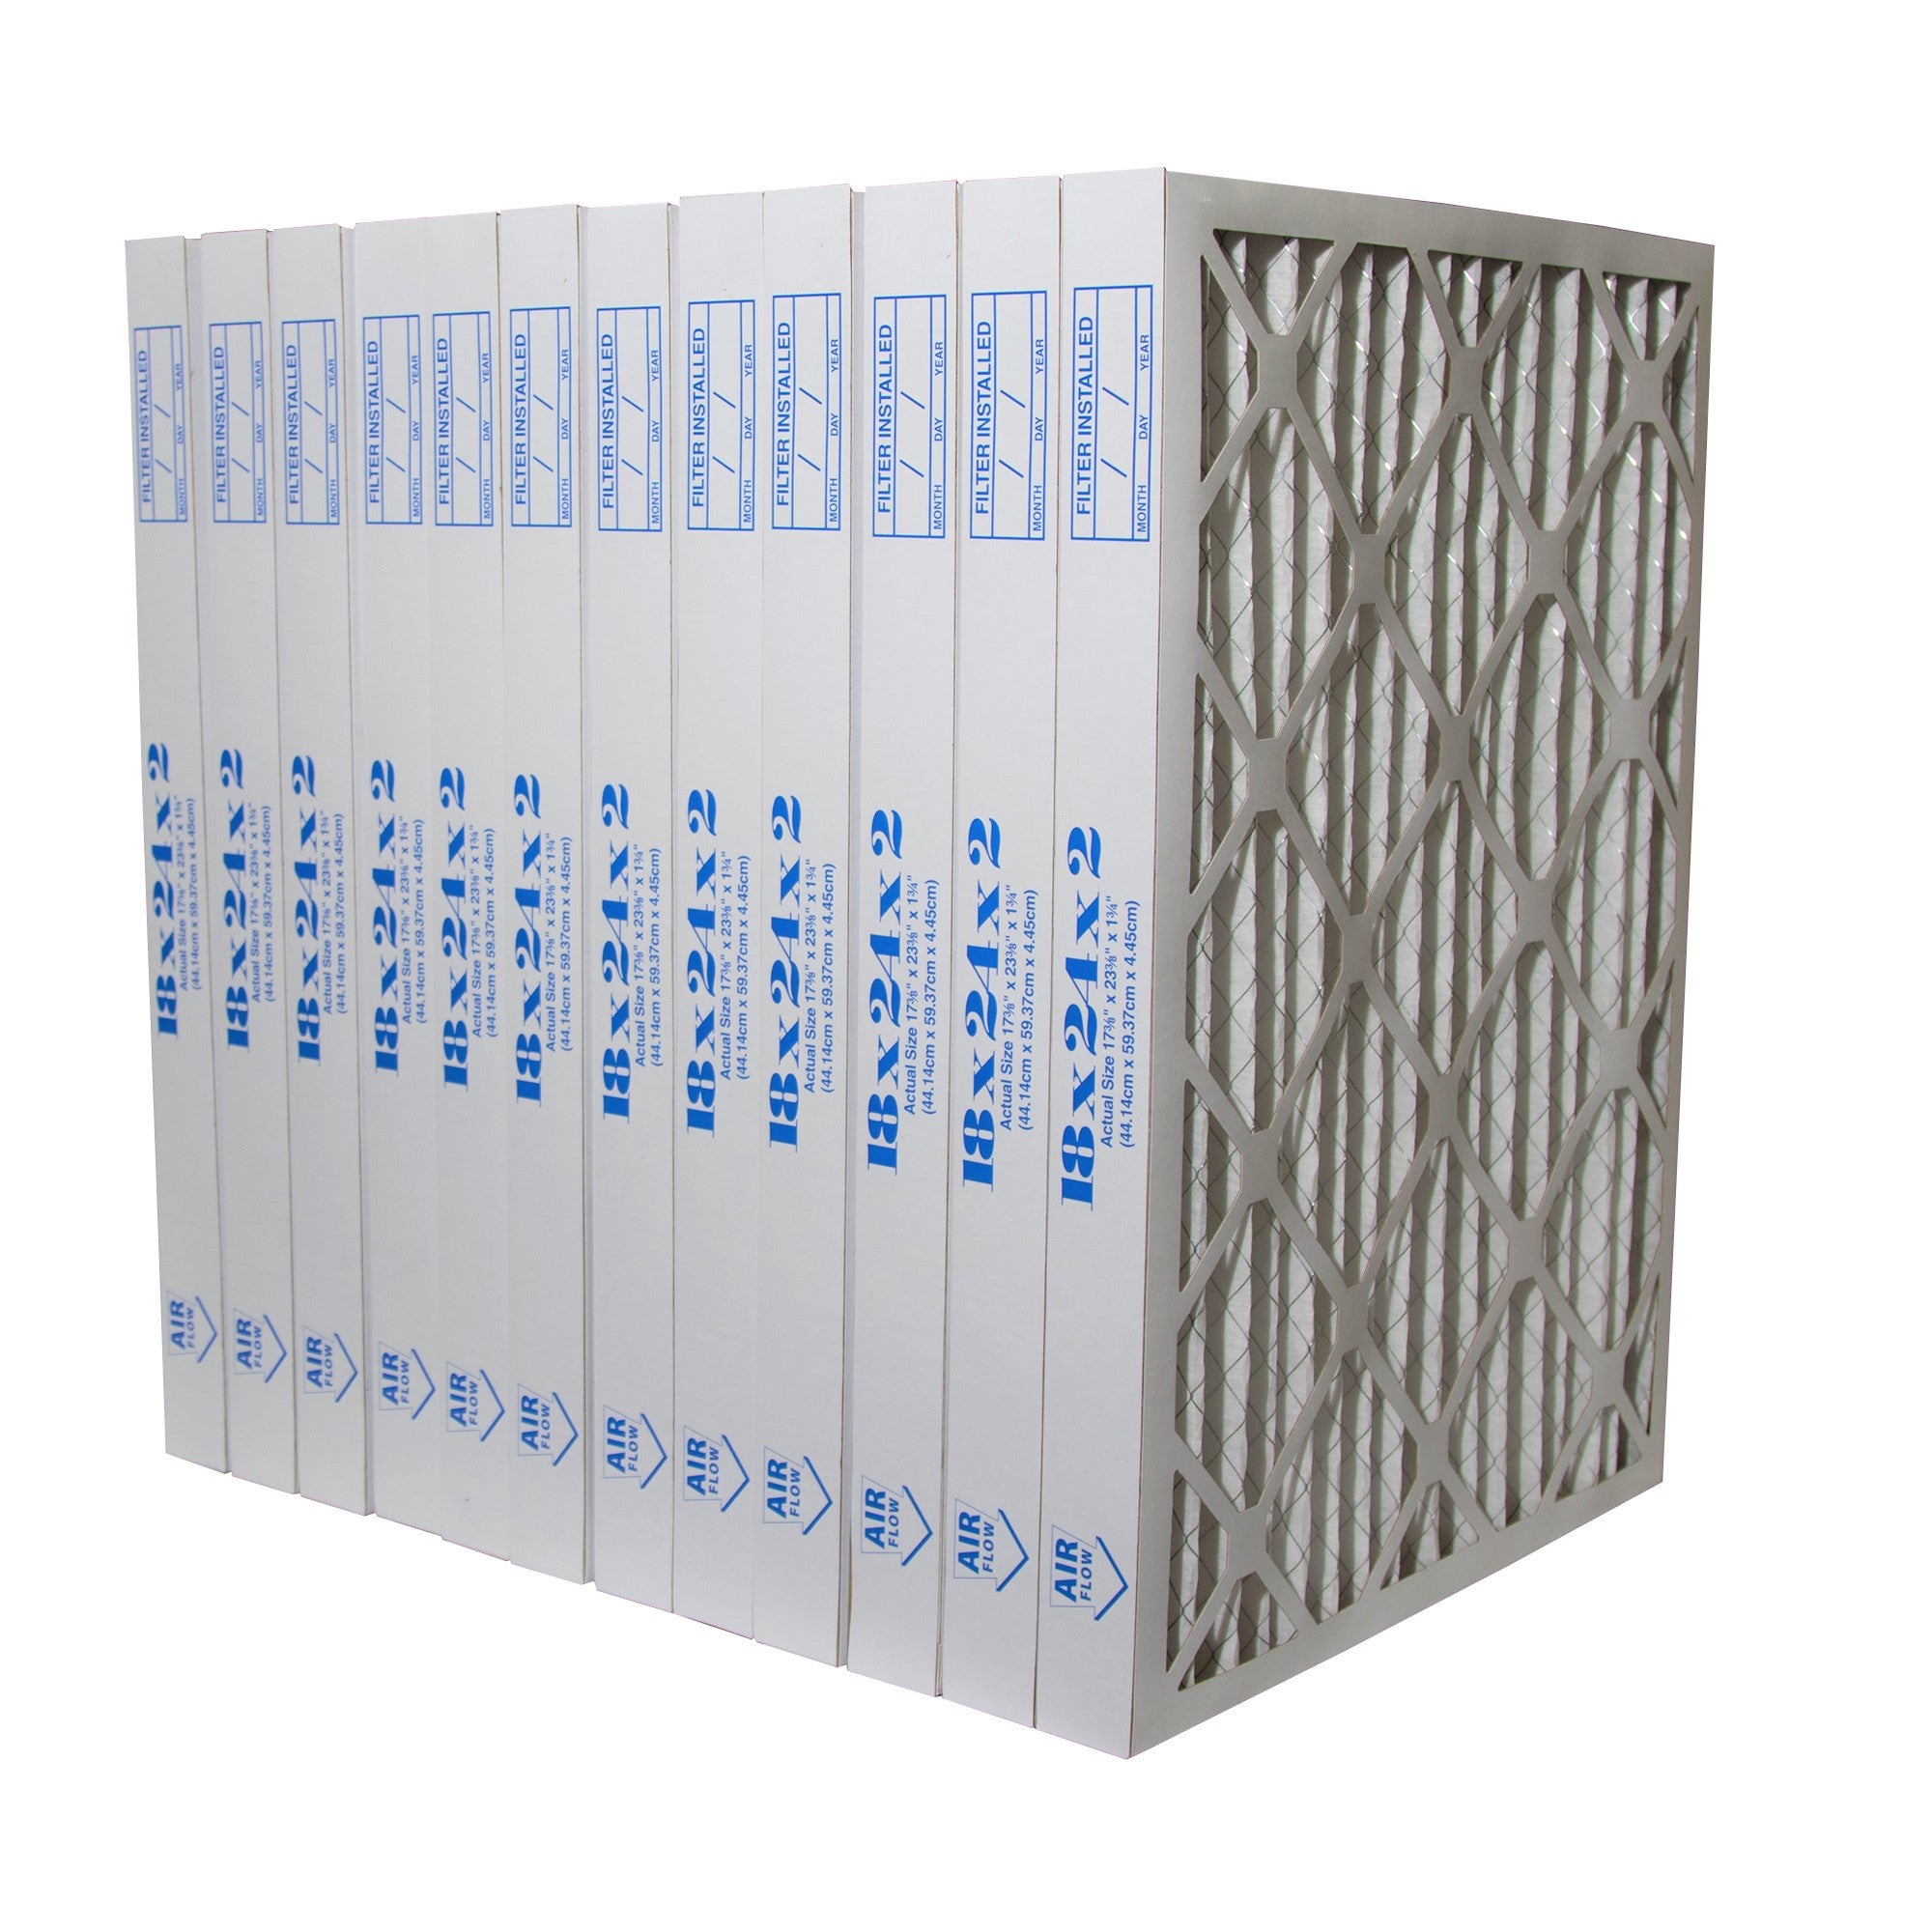 18x24x2 Furnace Filter MERV 8 Pleated Filters. Case of 12